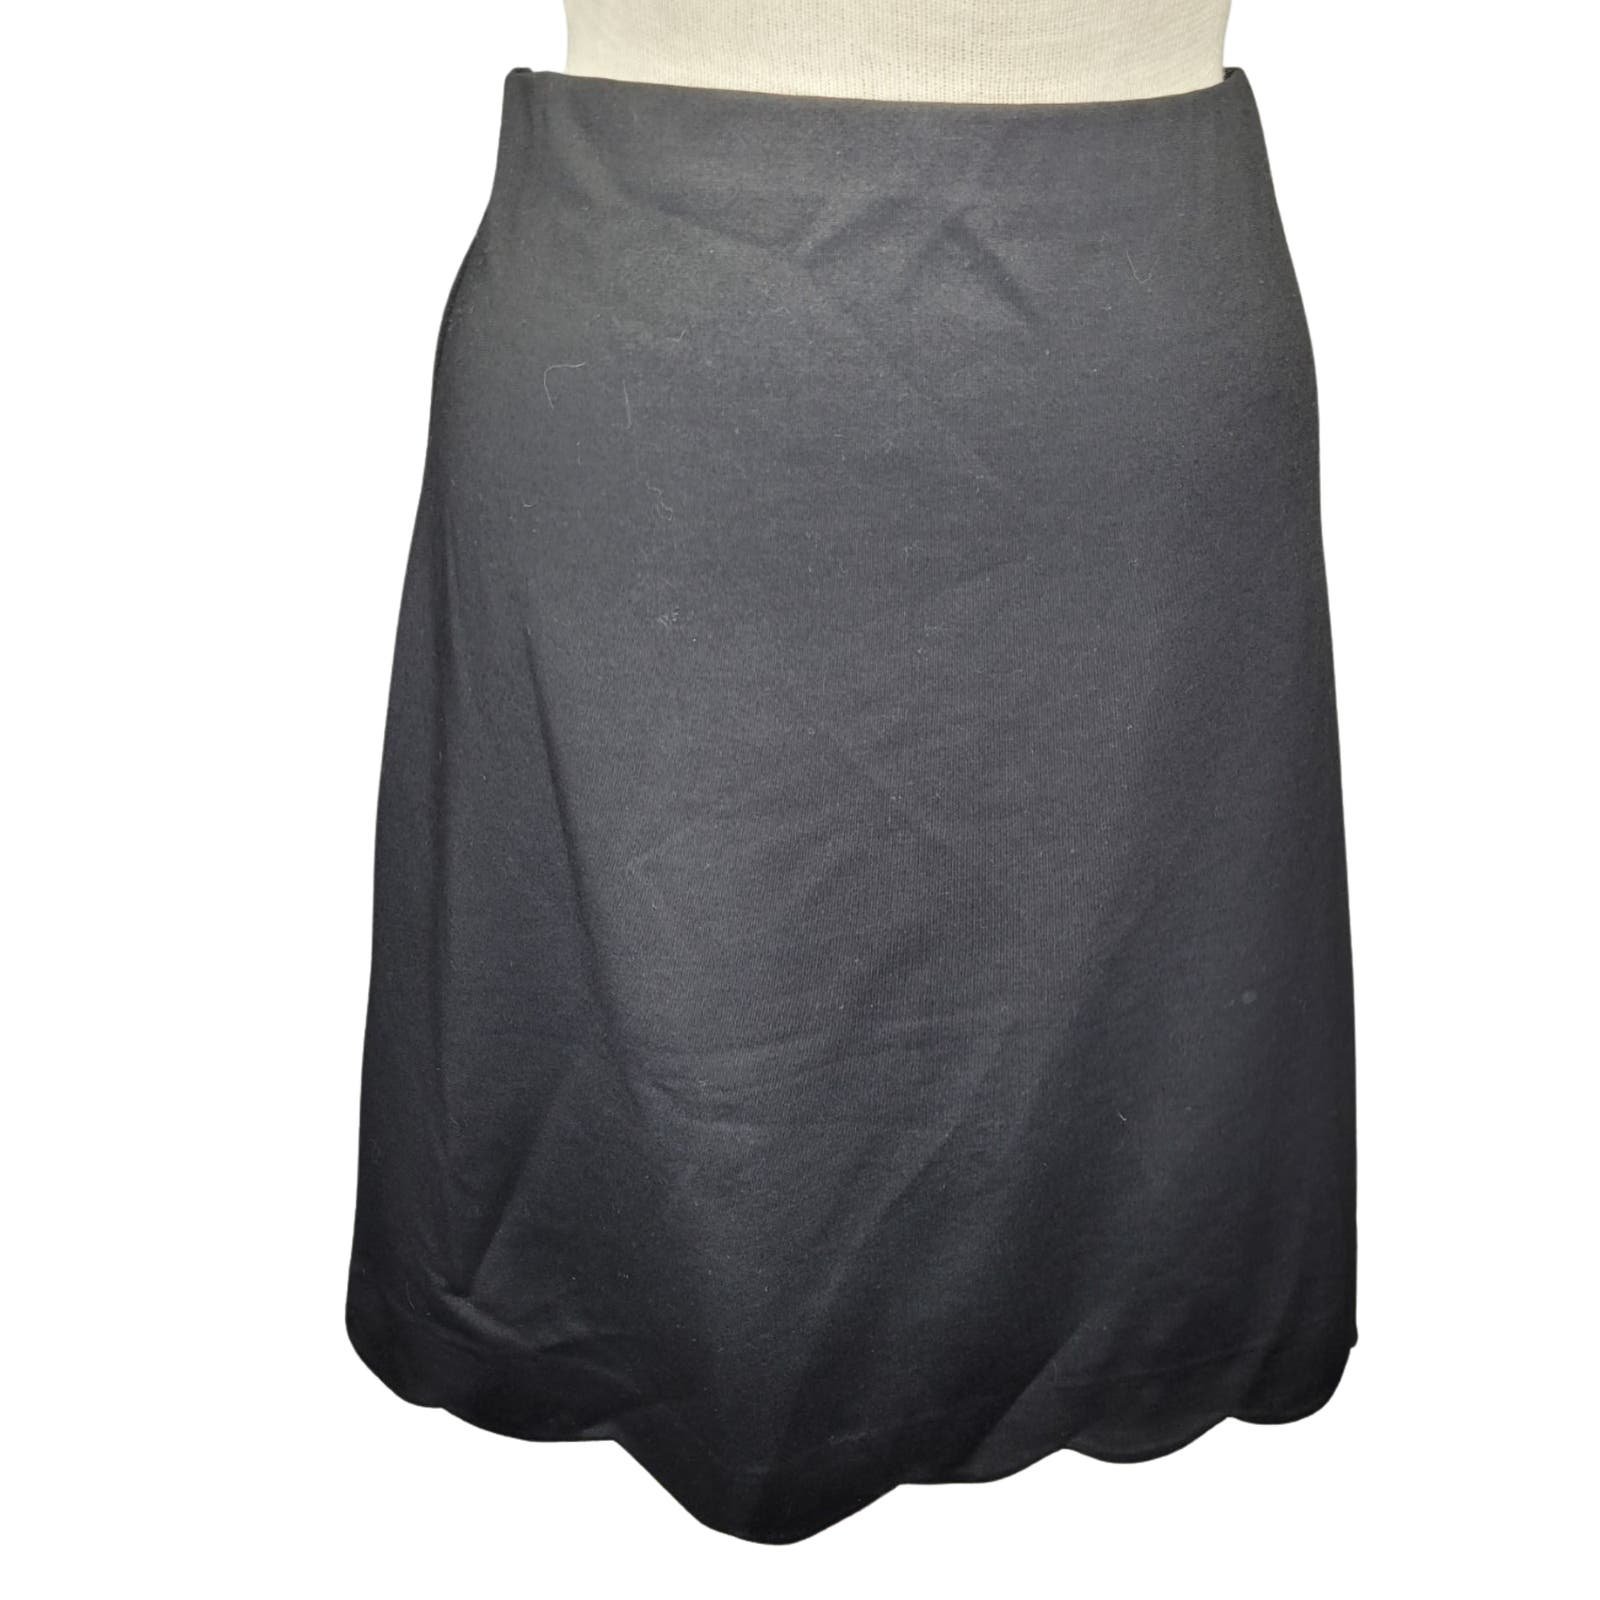 Fashion Trendy Scalloped A-Line Skirt Size 2X New with Tags OVlm5EN1E Low Price